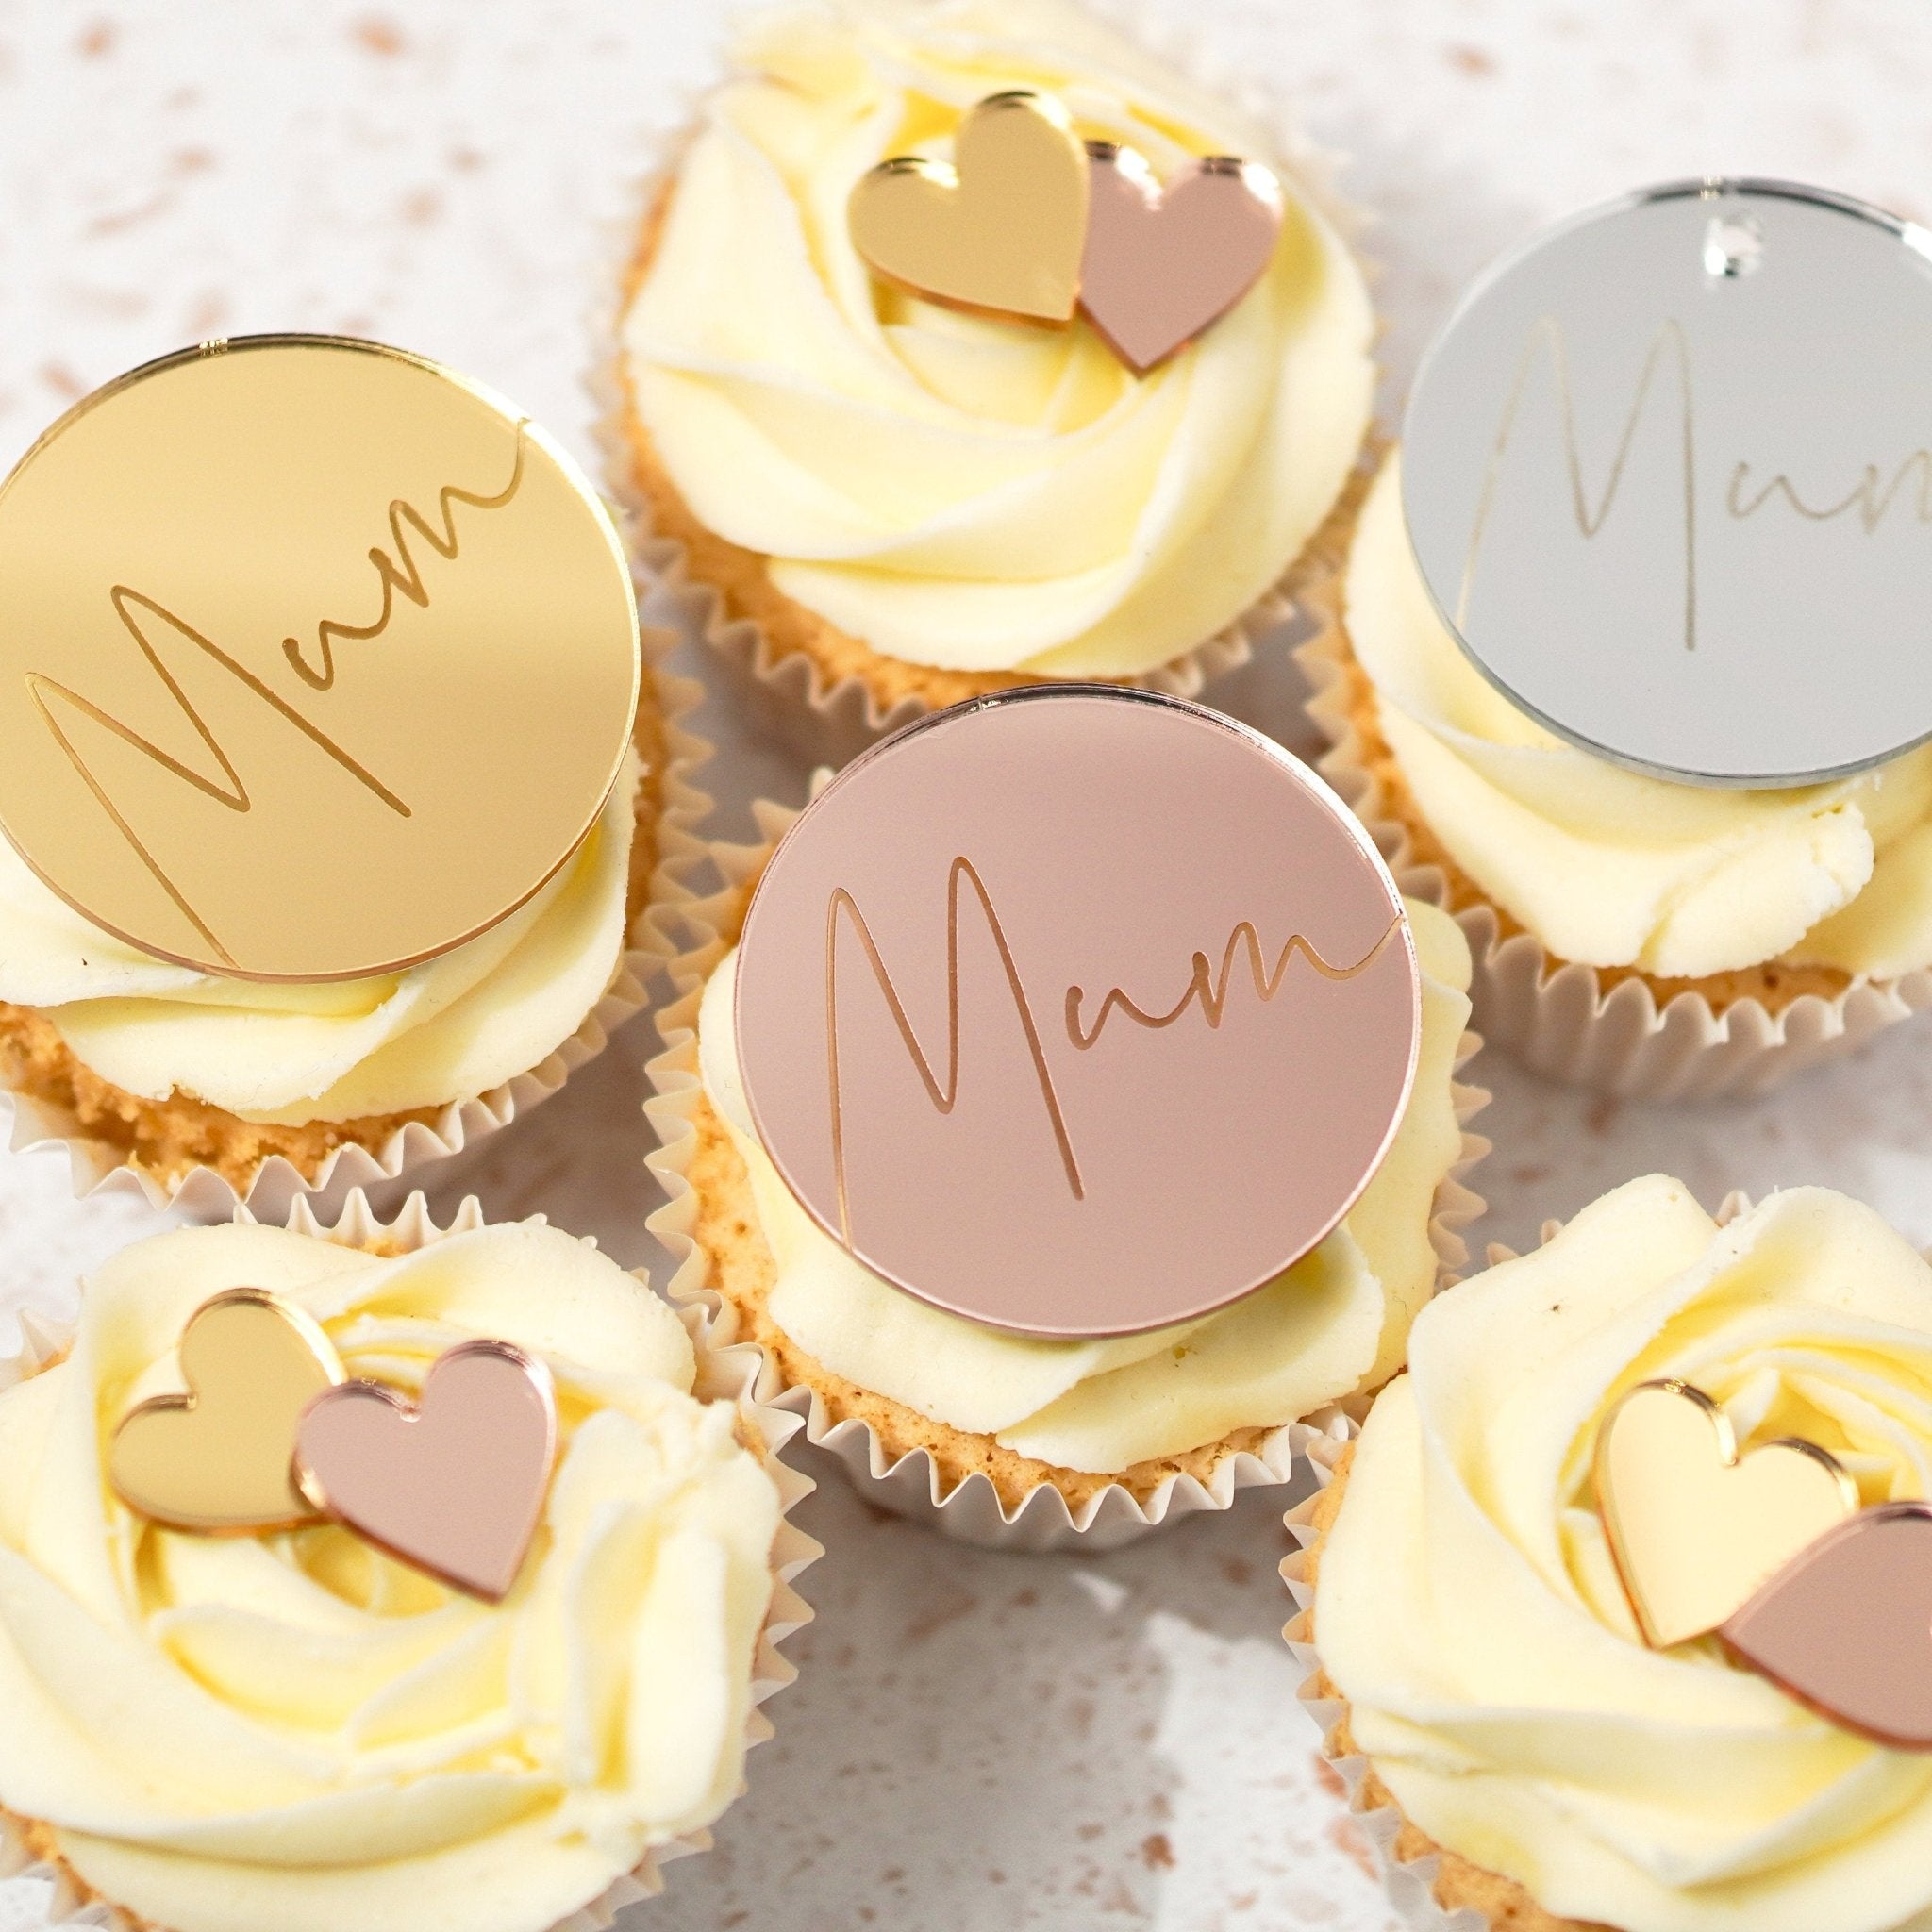 43 Wedding Cake Pull Charms Meanings and Customs - Curious and Cozy